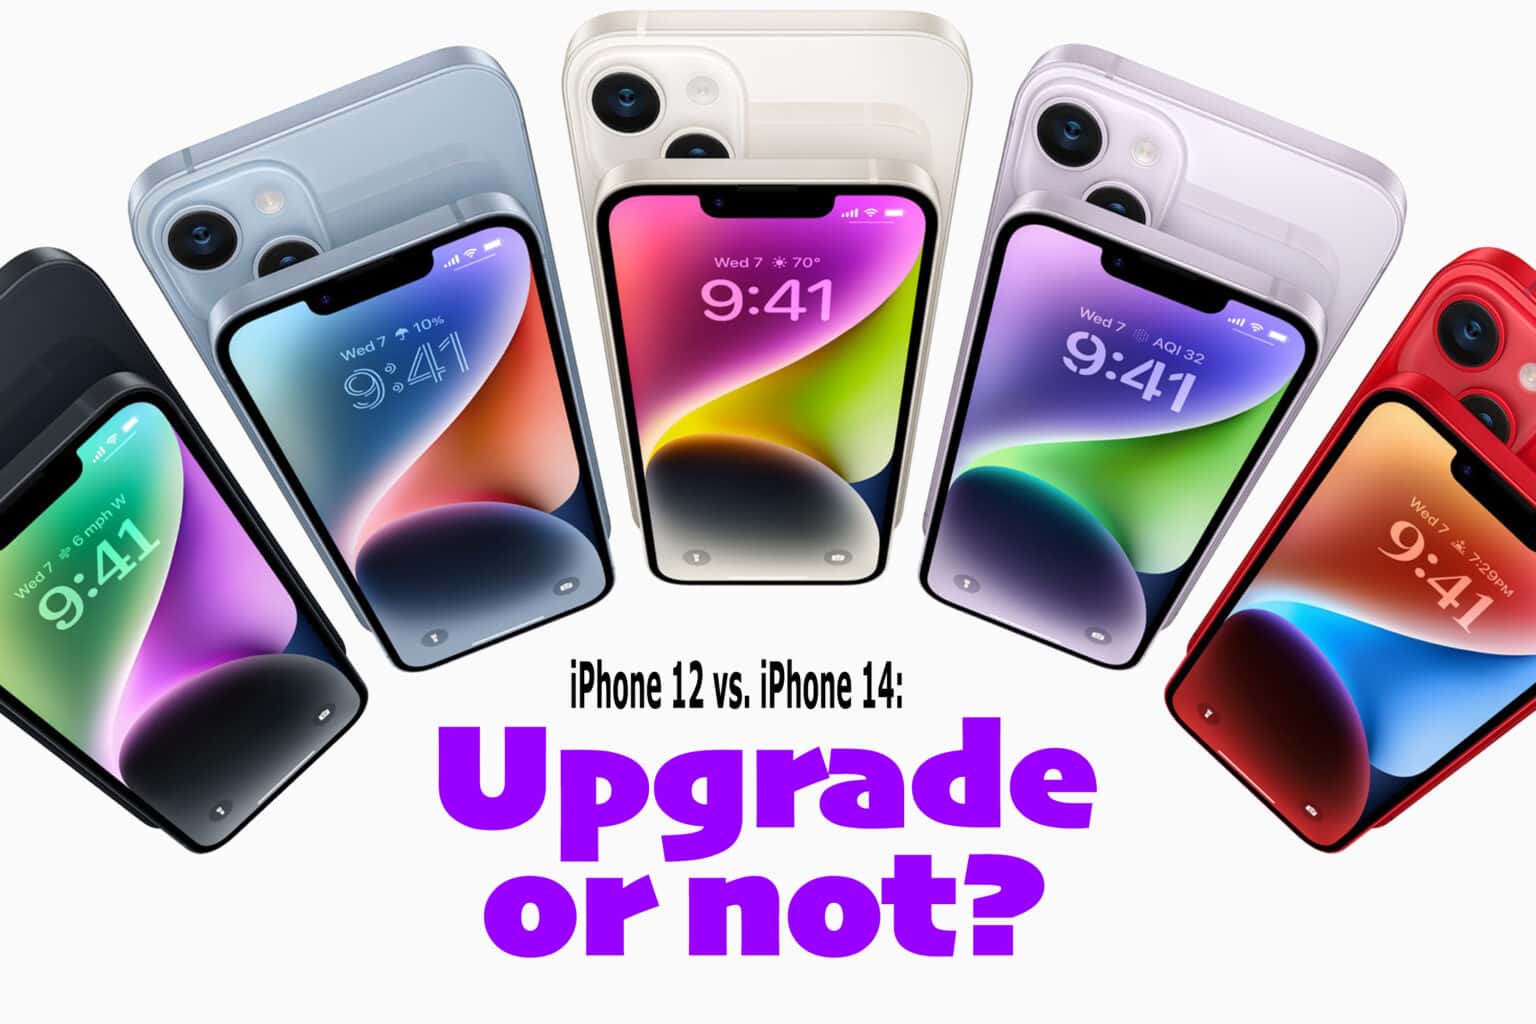 iPhone 12 to iPhone 14 upgrade: Is the jump worth it, or should you wait for iPhone 15?